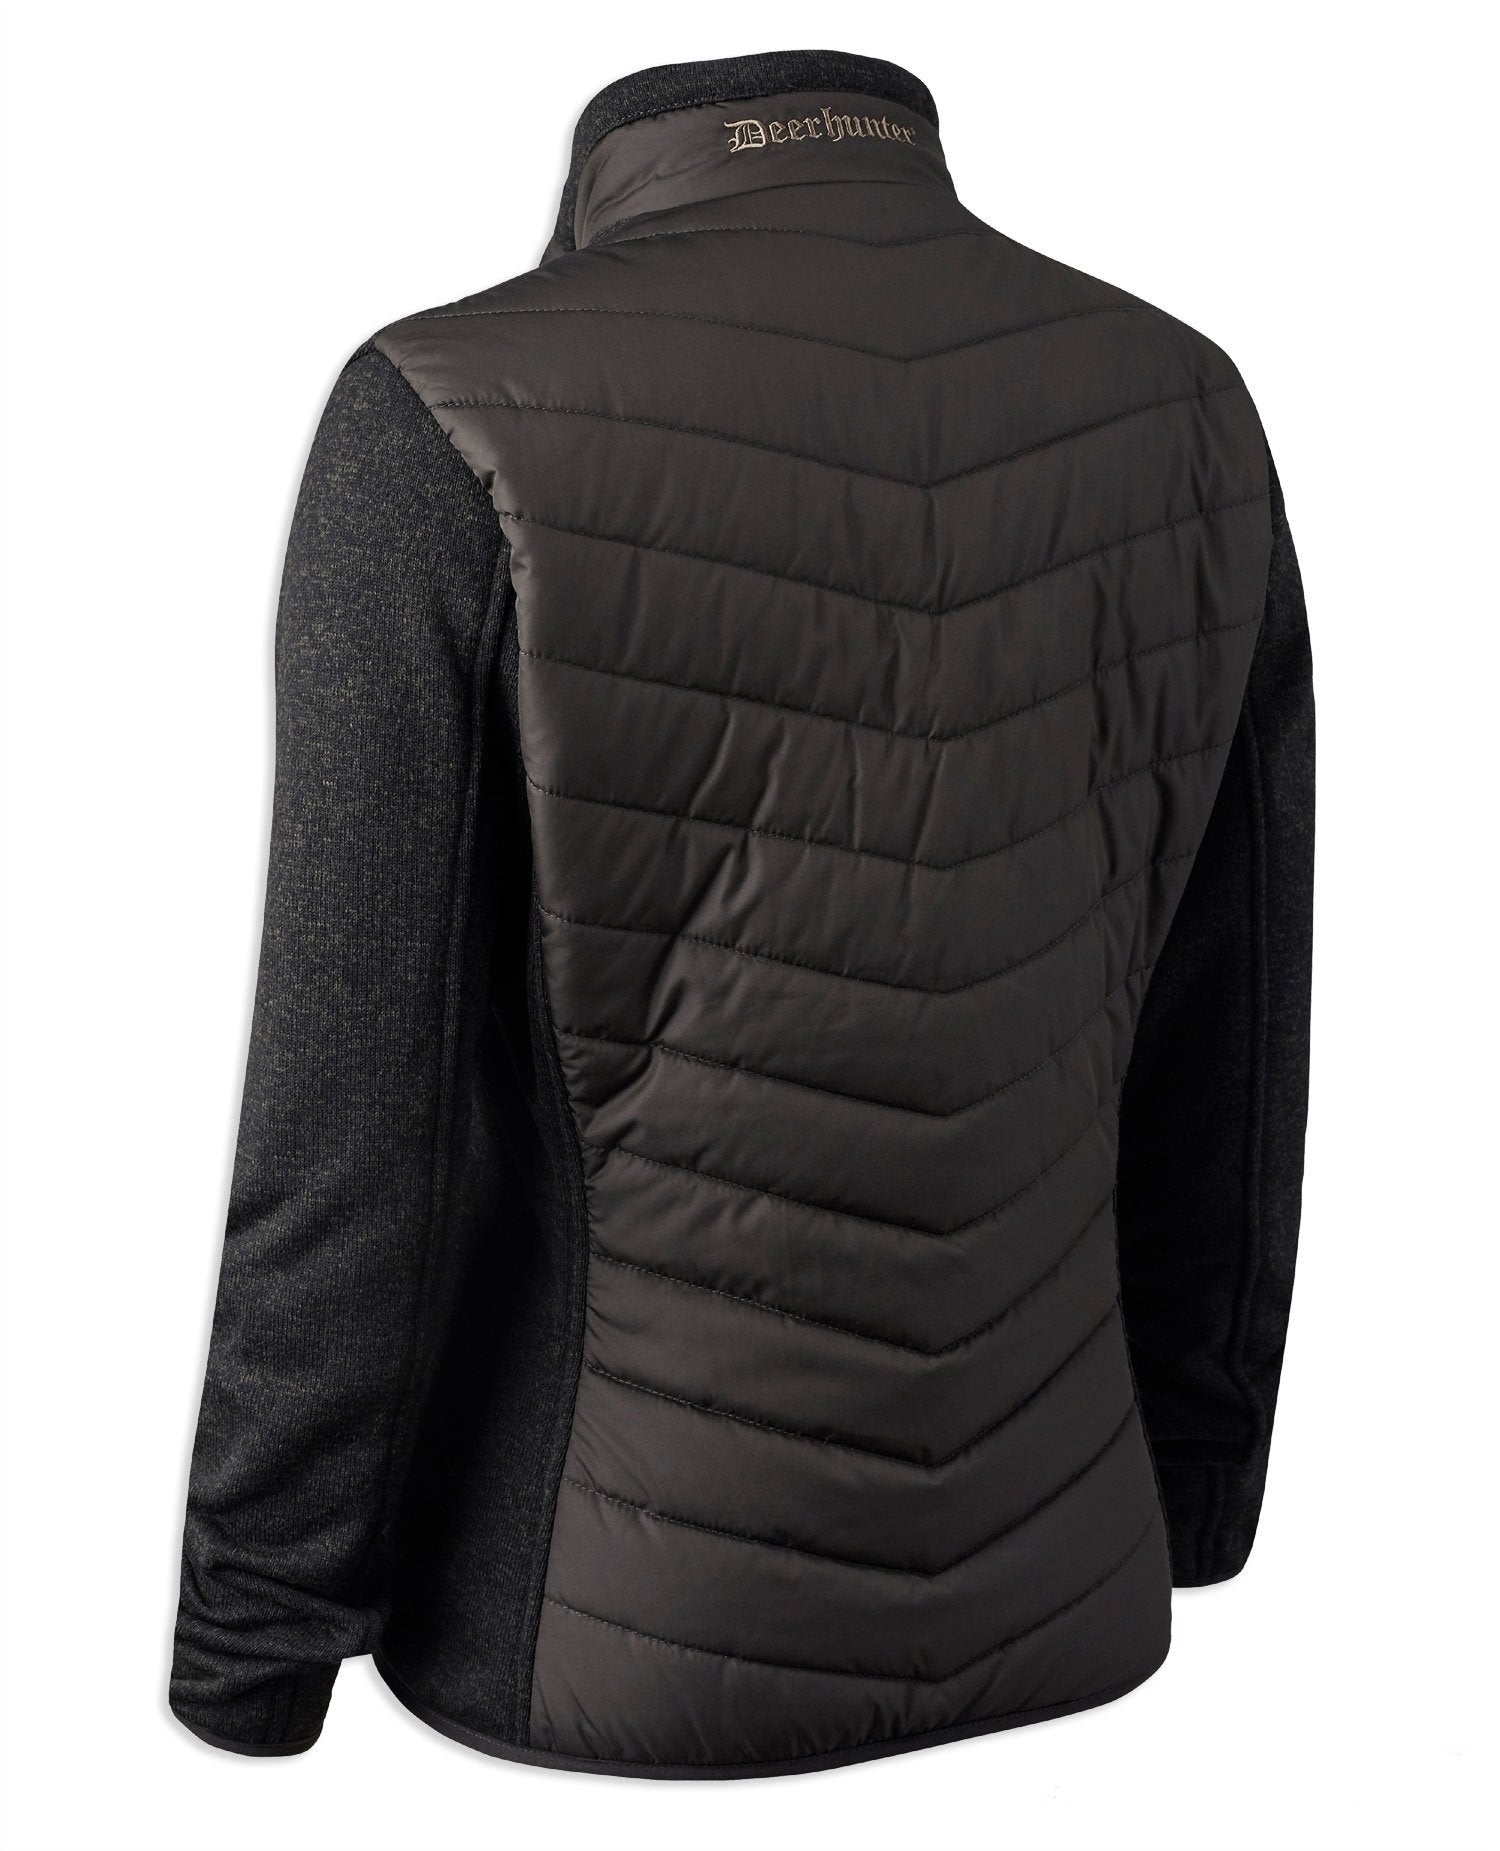 Back view Lady Caroline Quilted Jacket by Deerhunter 